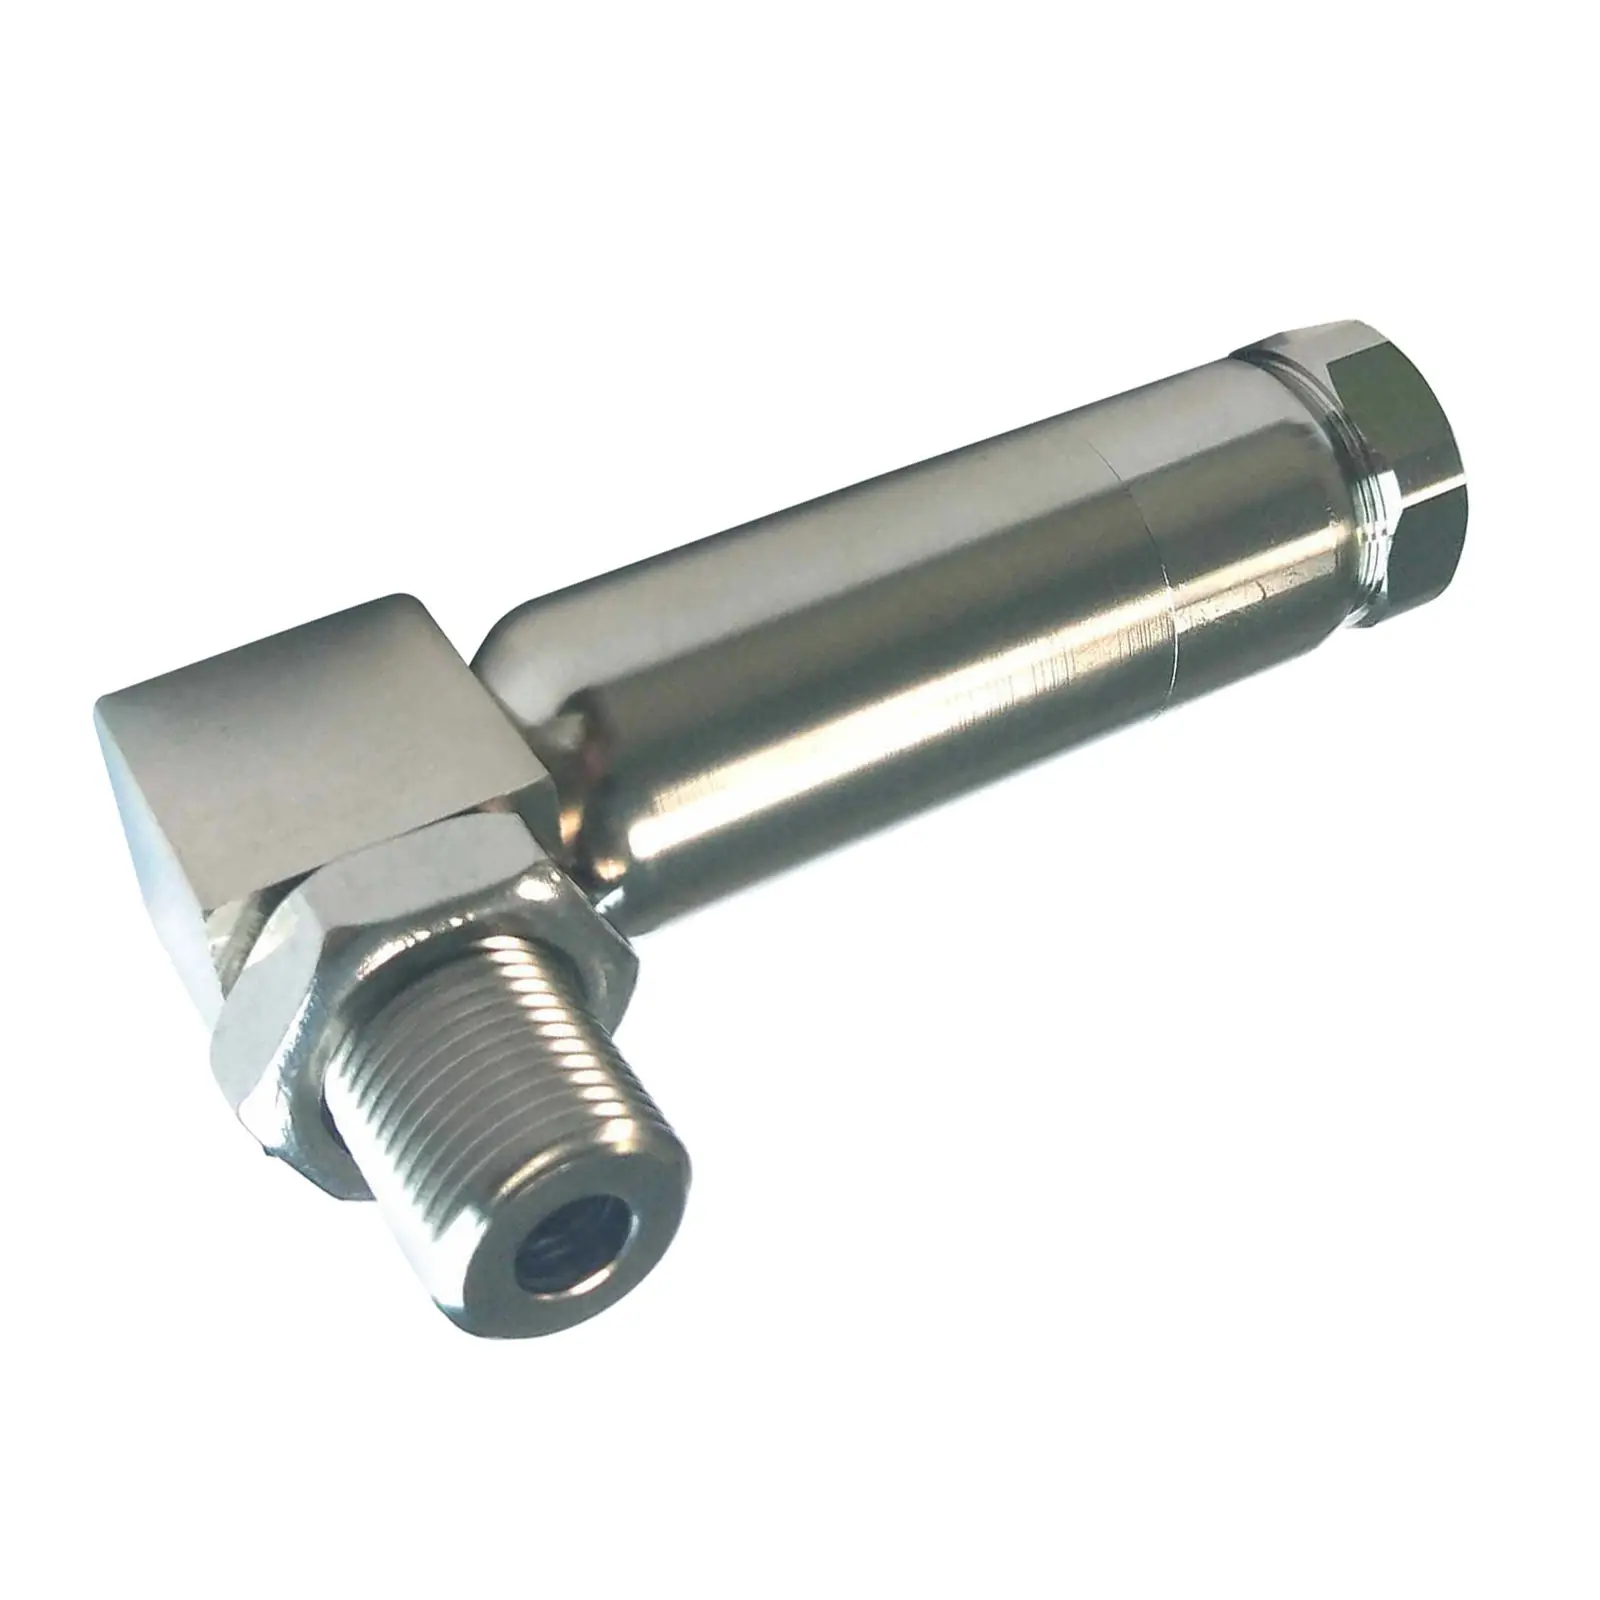 Stainless Steel O2  Angled Extender Spacer M18 x1.5,Universal for Any Thread Size of 18mm